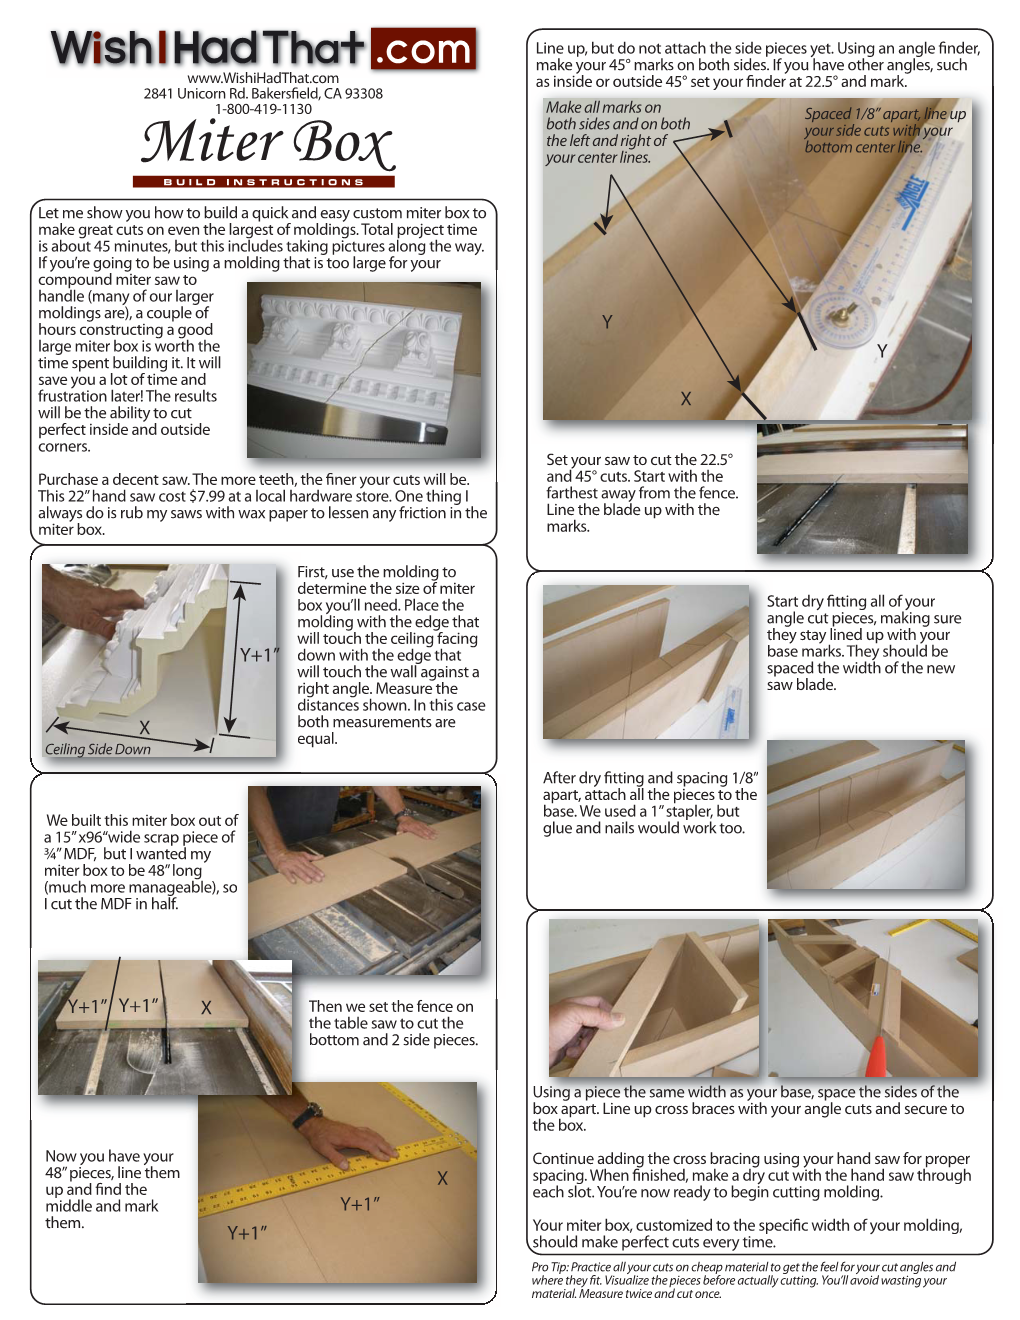 Miter Box Your Center Lines